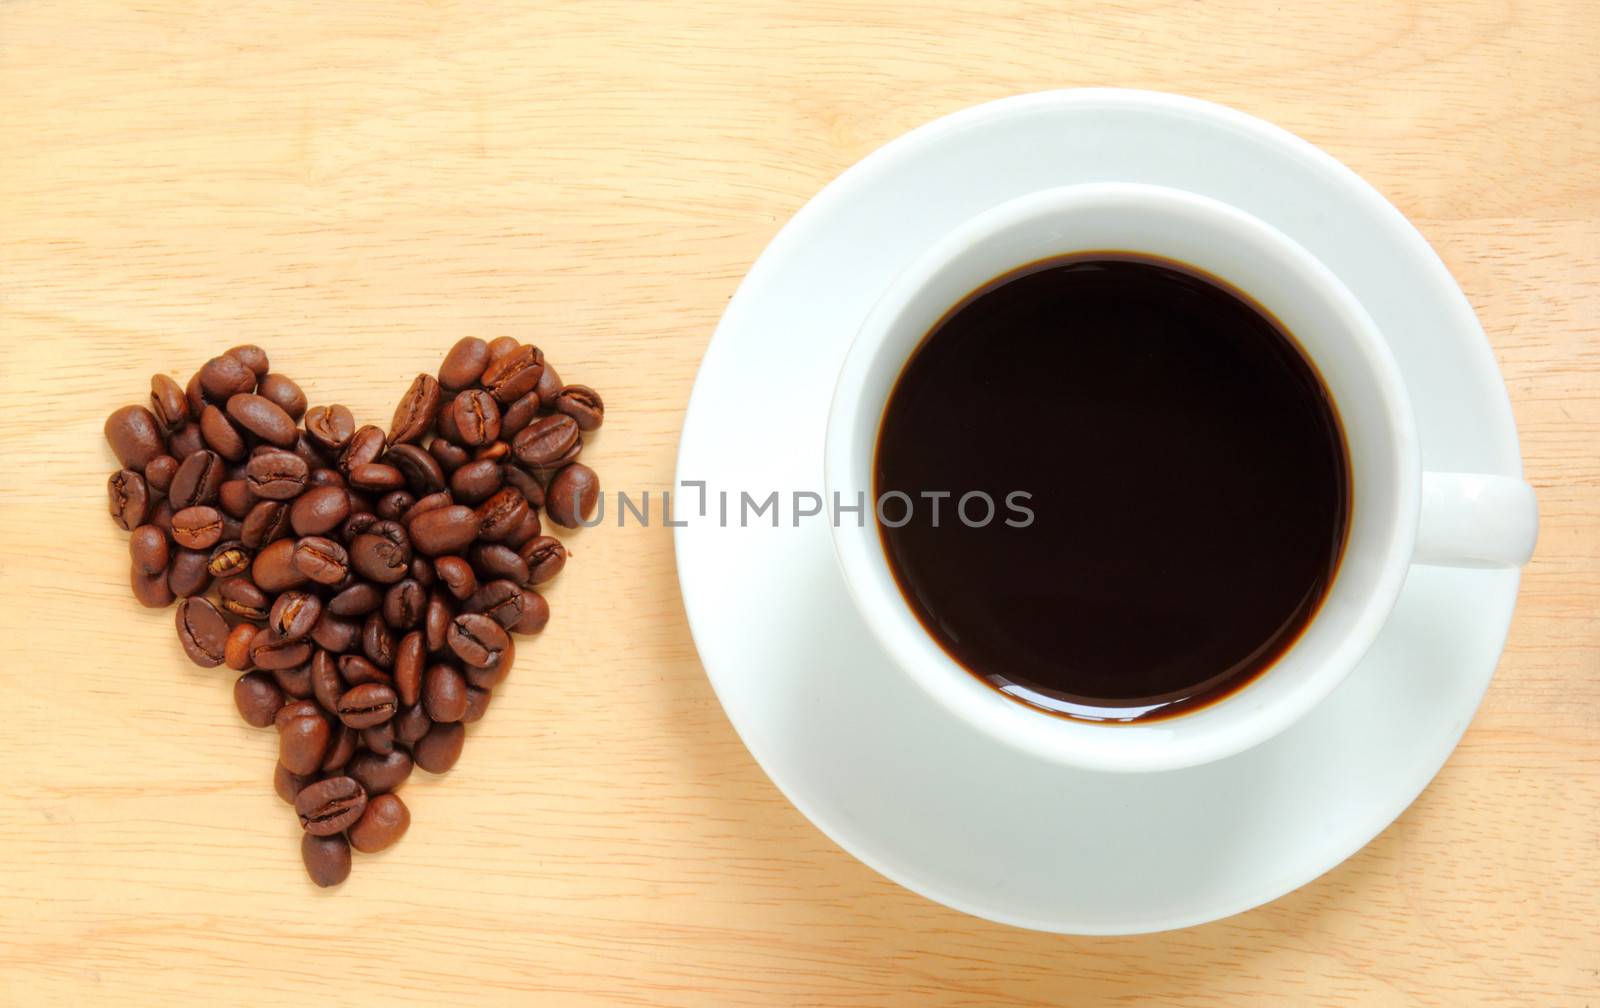 Heart shape made from coffee beans with a cup of coffee